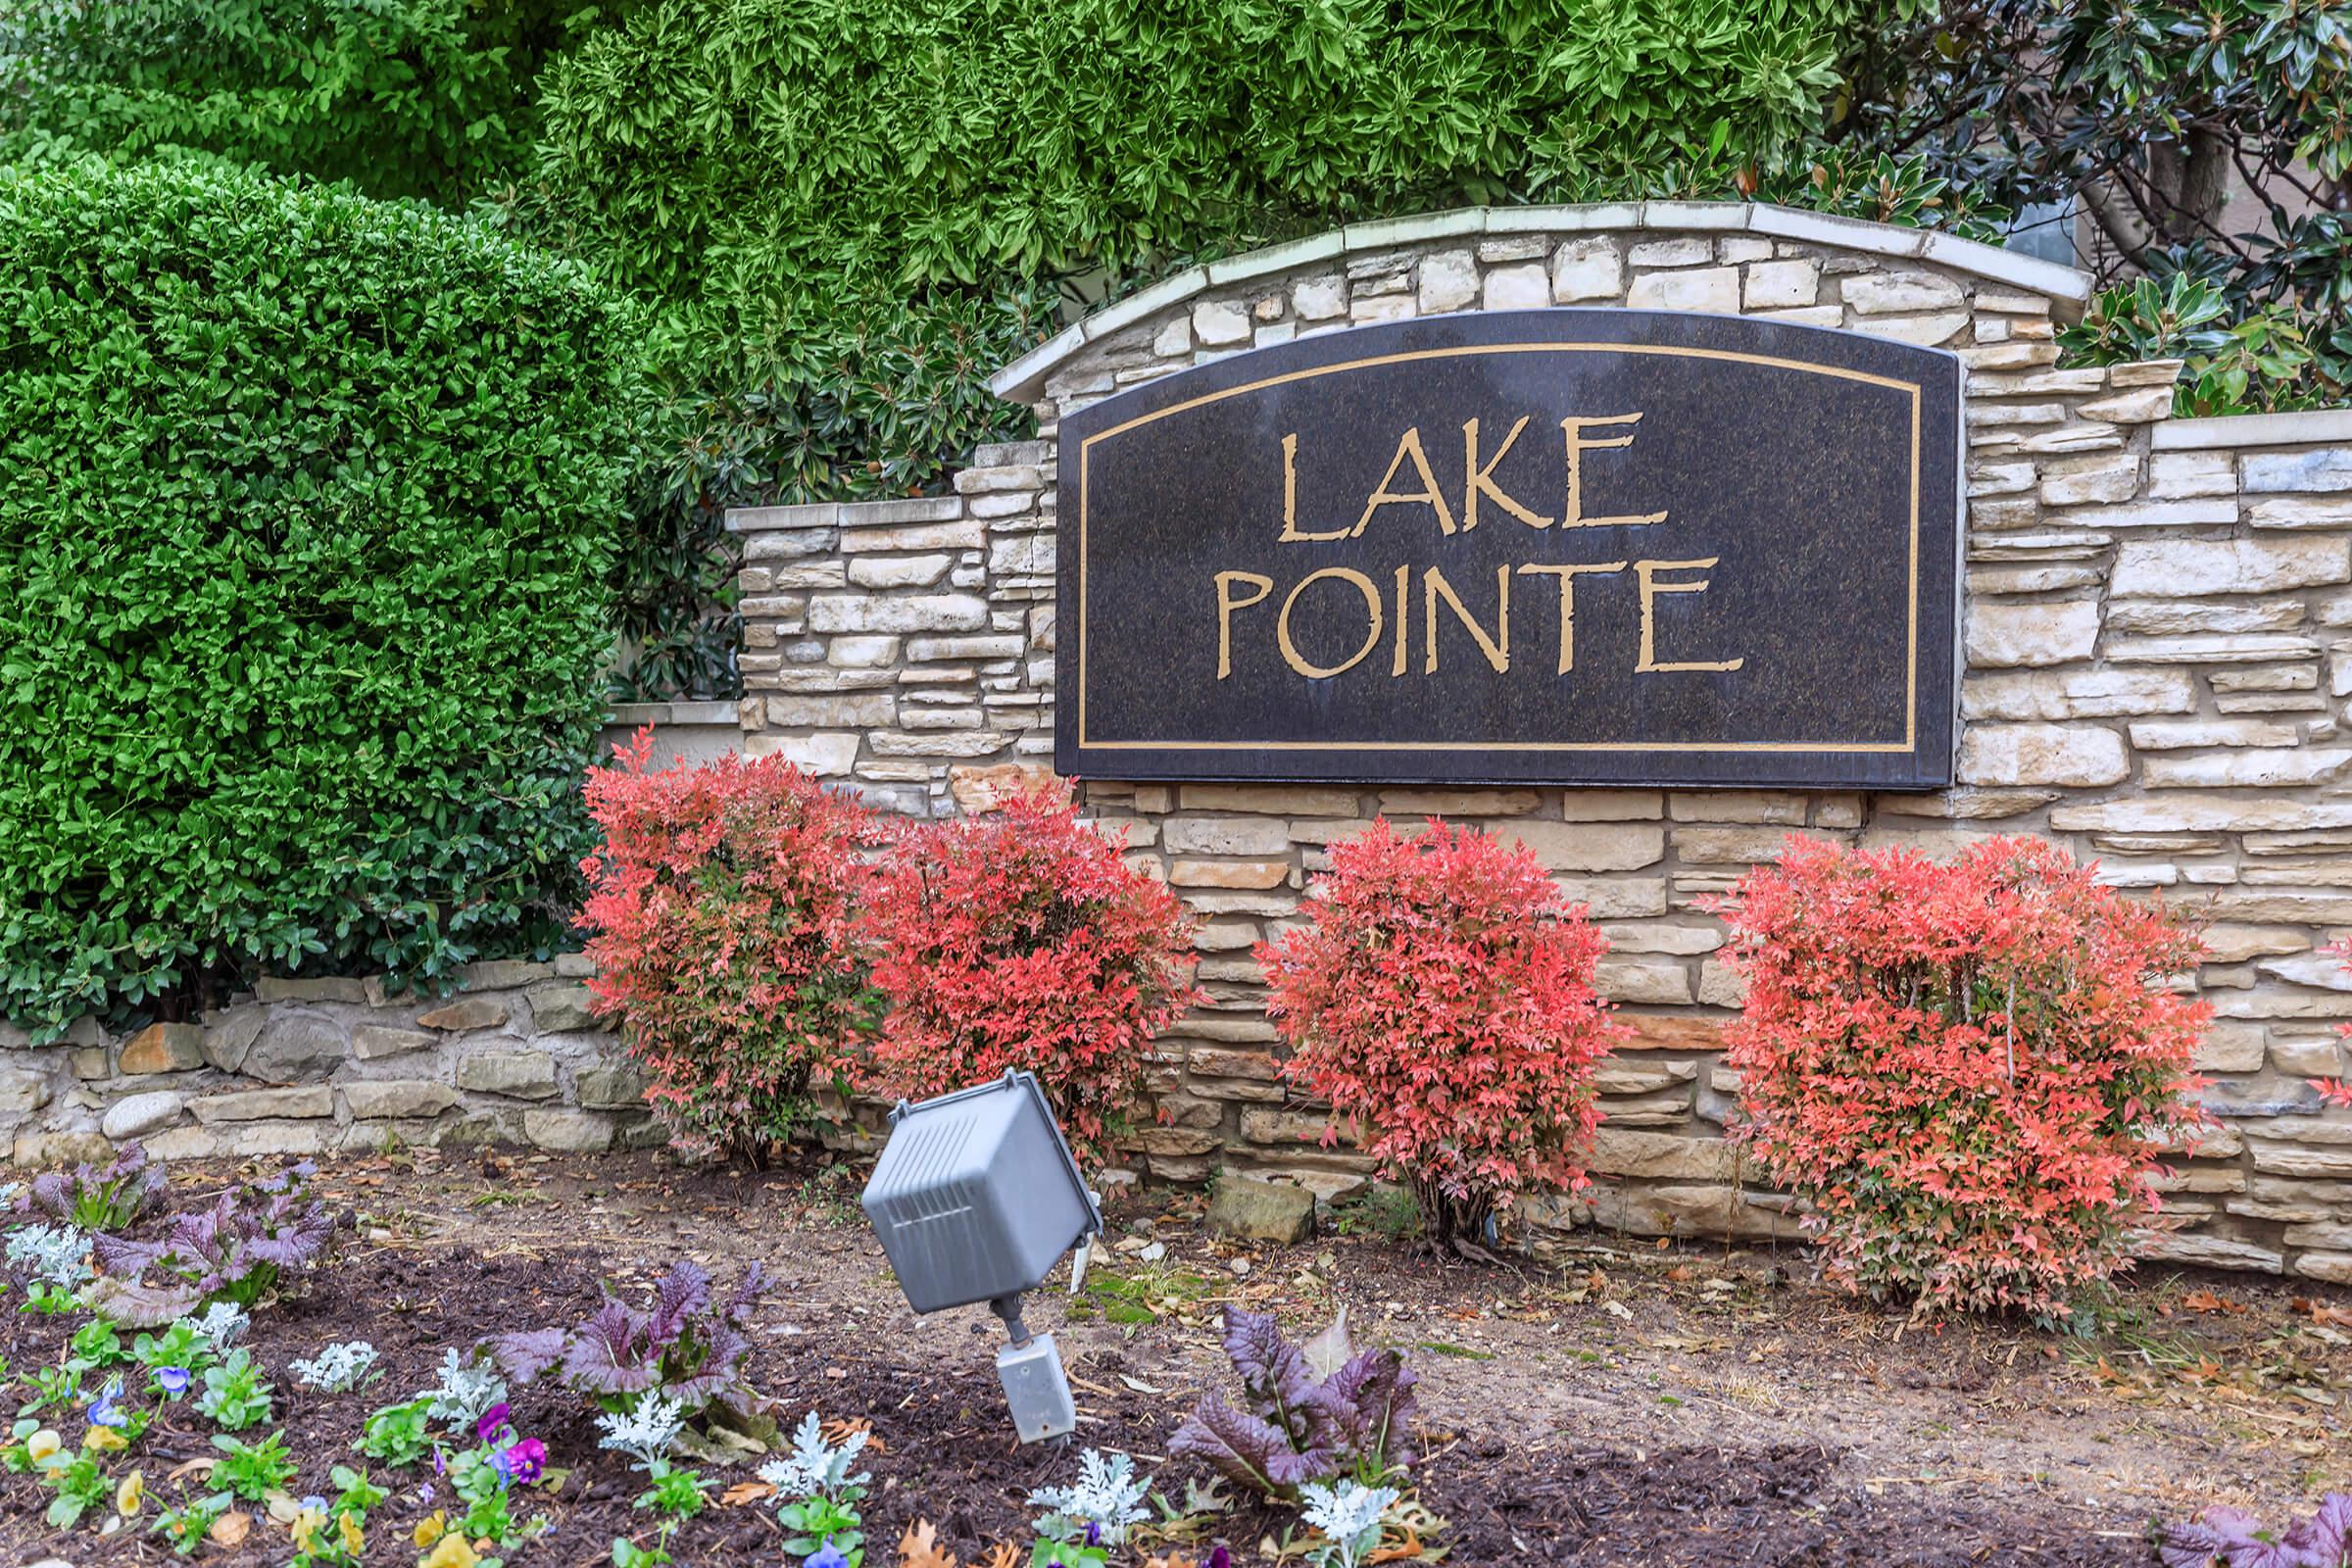 Lake Pointe monument sign